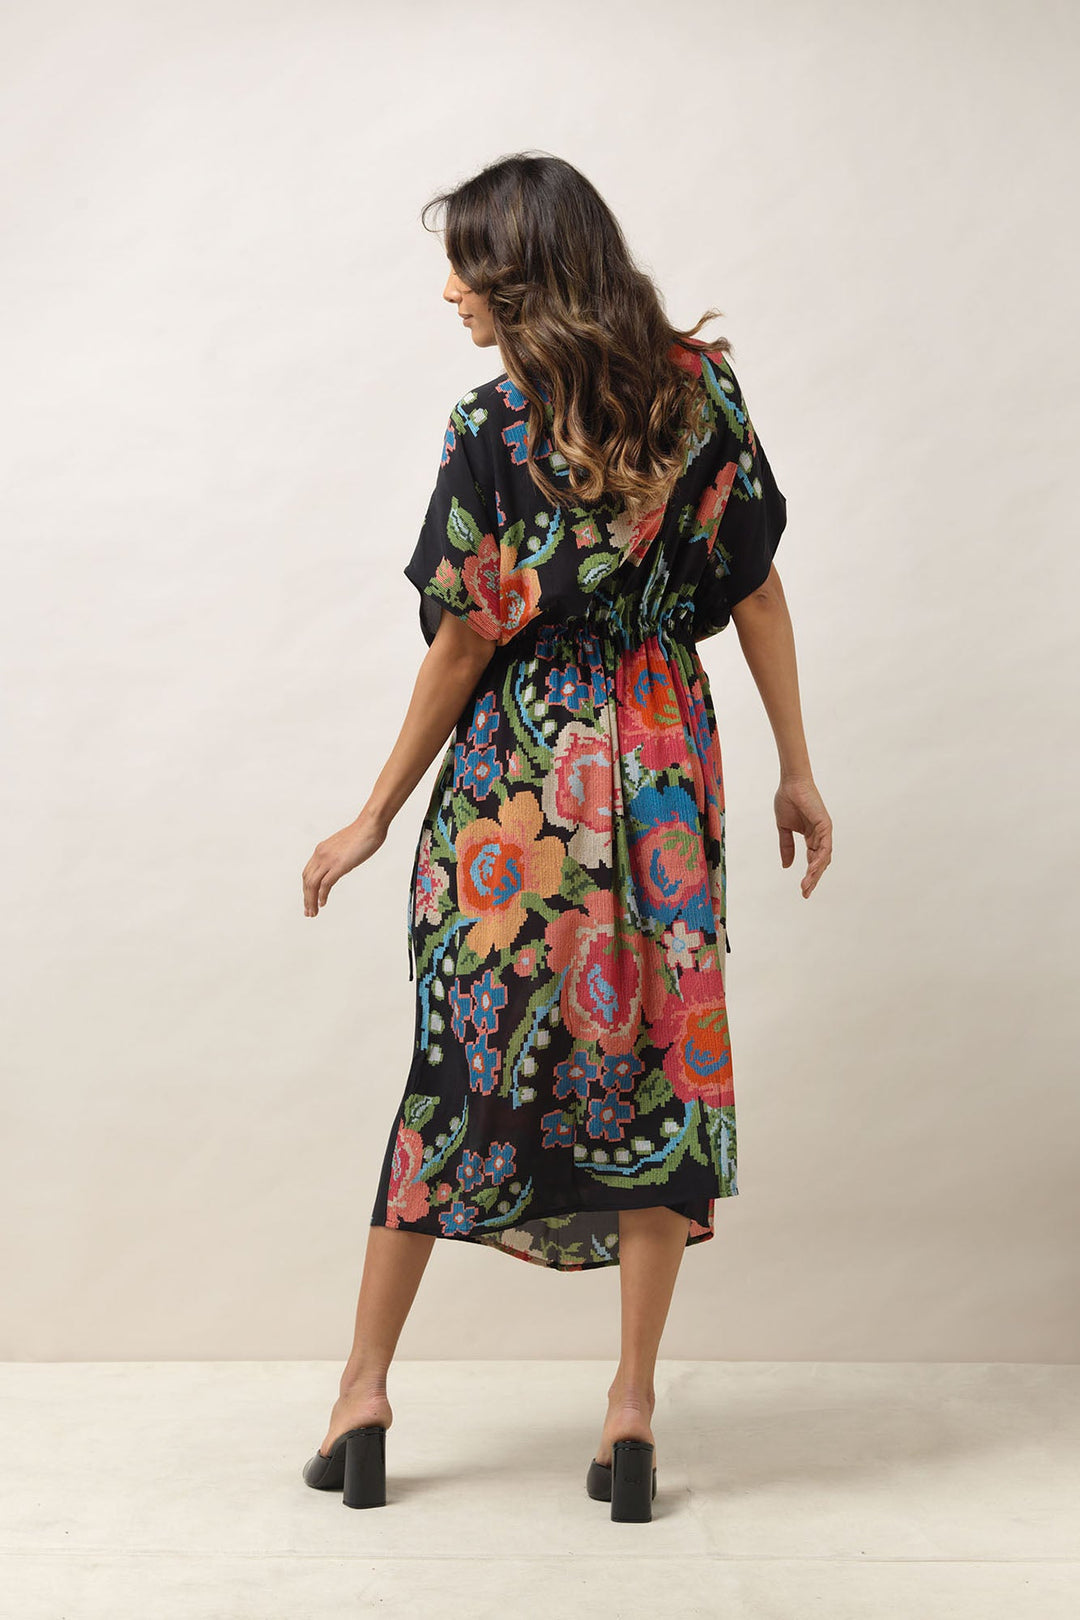 Women's lightweight beach cover up dress with tie waist in black with a colourful woven flower print by One Hundred Stars